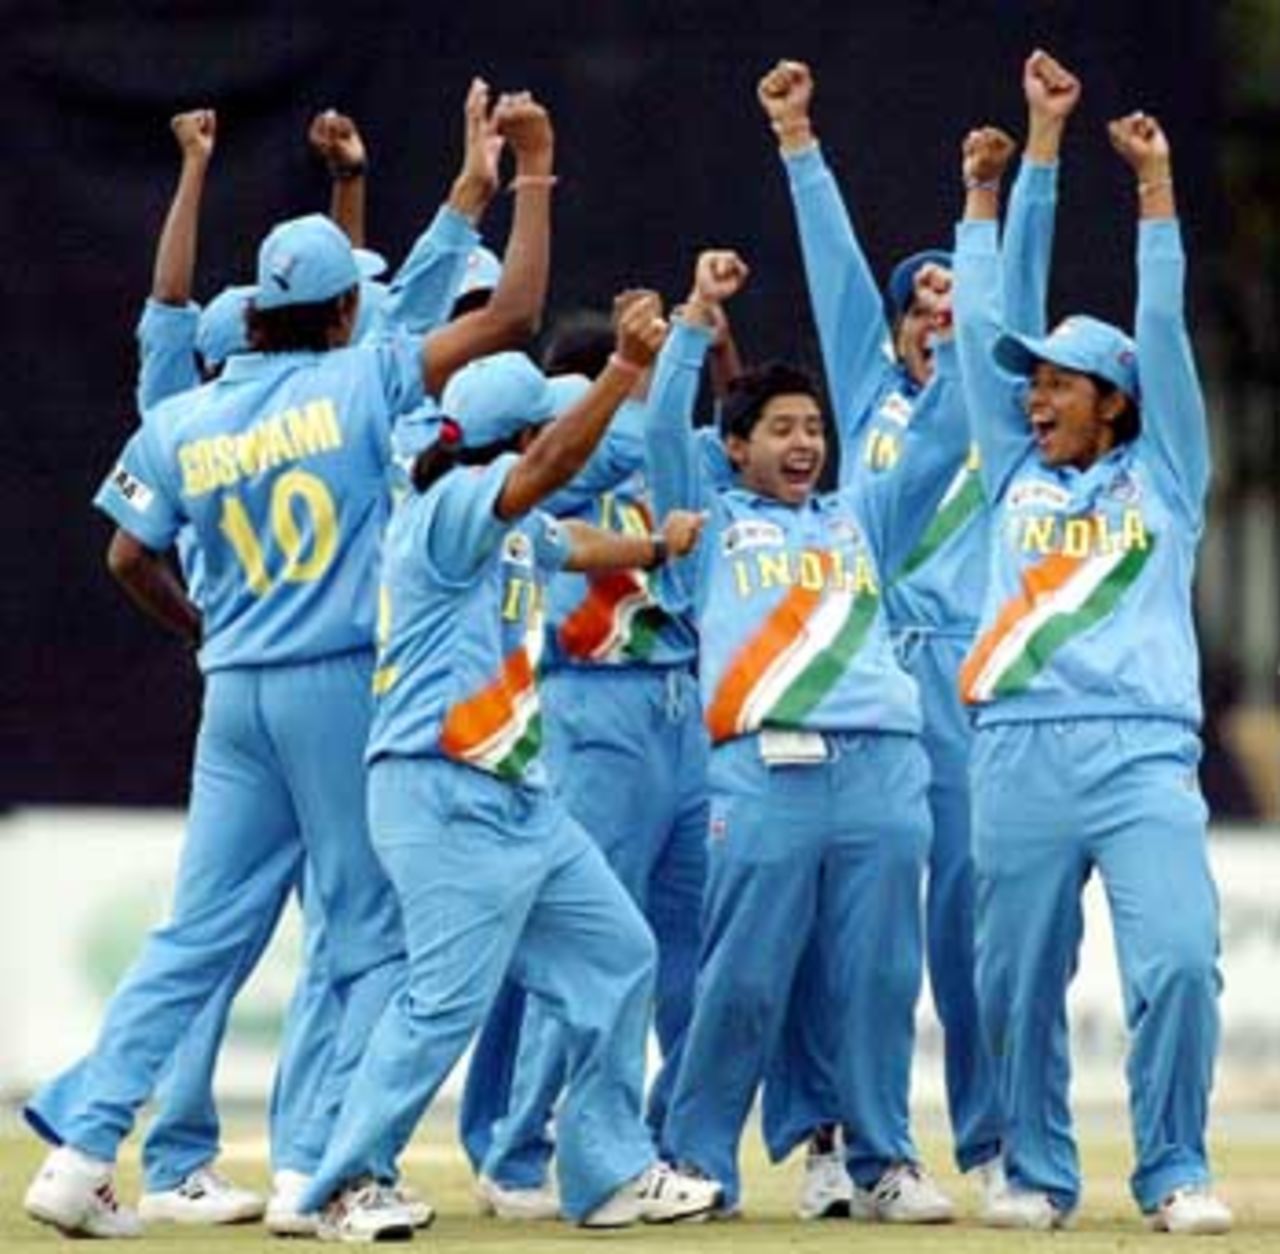 The Indian women's team celebrate on the way to beating New Zealand, India v New Zealand, Potchefstroom, April 7, 2005